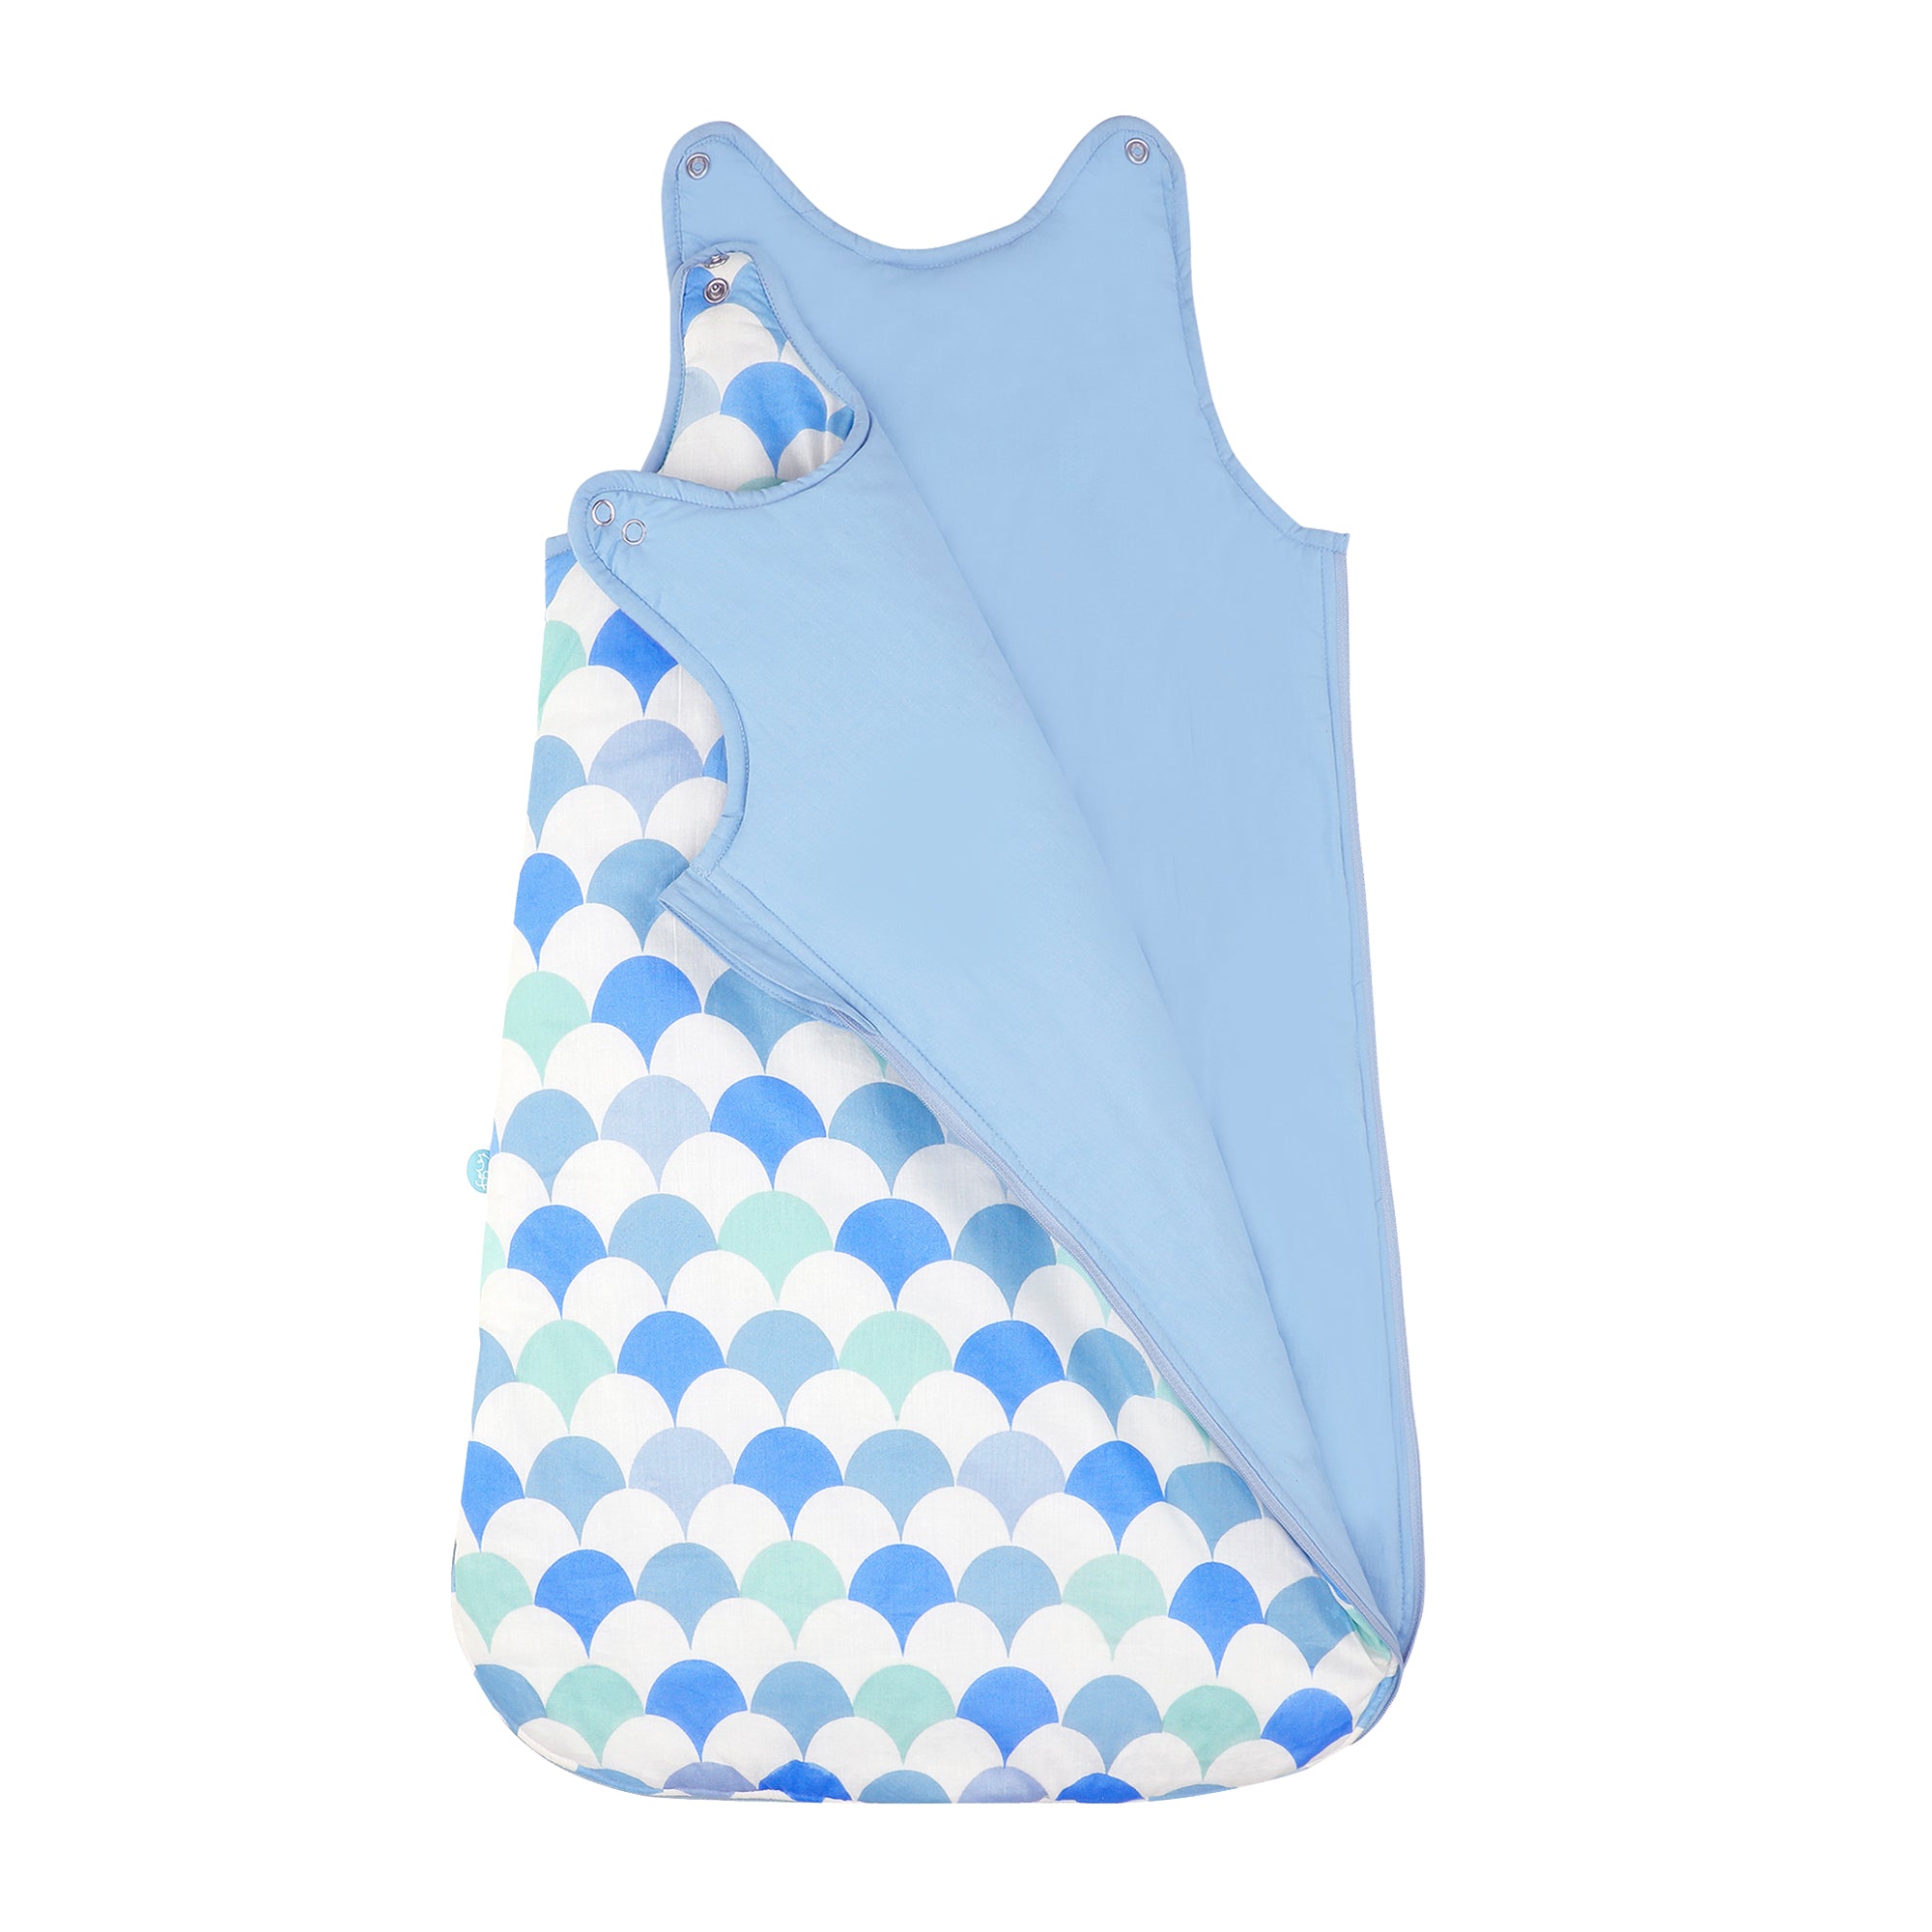 ICY BLUE SCALLOP SLEEPING BAG (2-4 MONTHS)